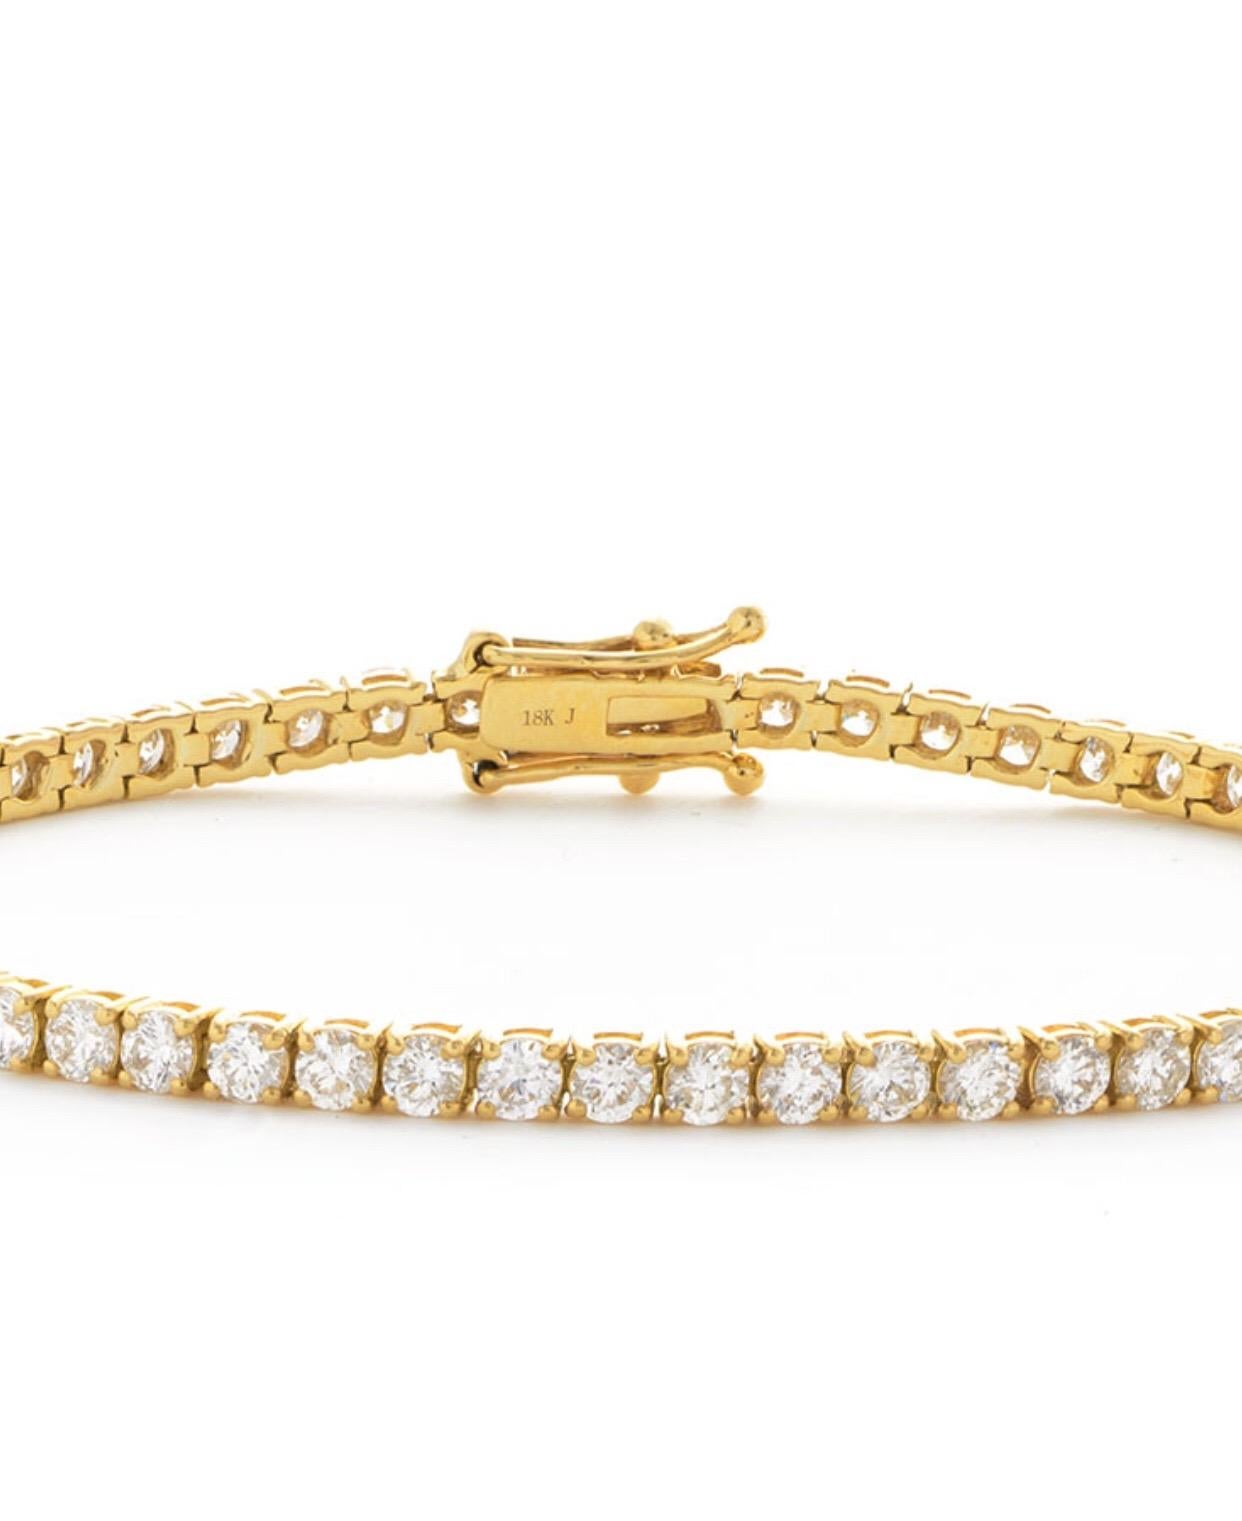 A classic piece that stands the test of time, enjoy the ultimate in luxury and beauty with this gorgeous diamond tennis bracelet, featuring 1.15 Carat of dazzling White Color G Clarity SI1 Round Brilliant Cut diamonds beautifully held in a classic 4